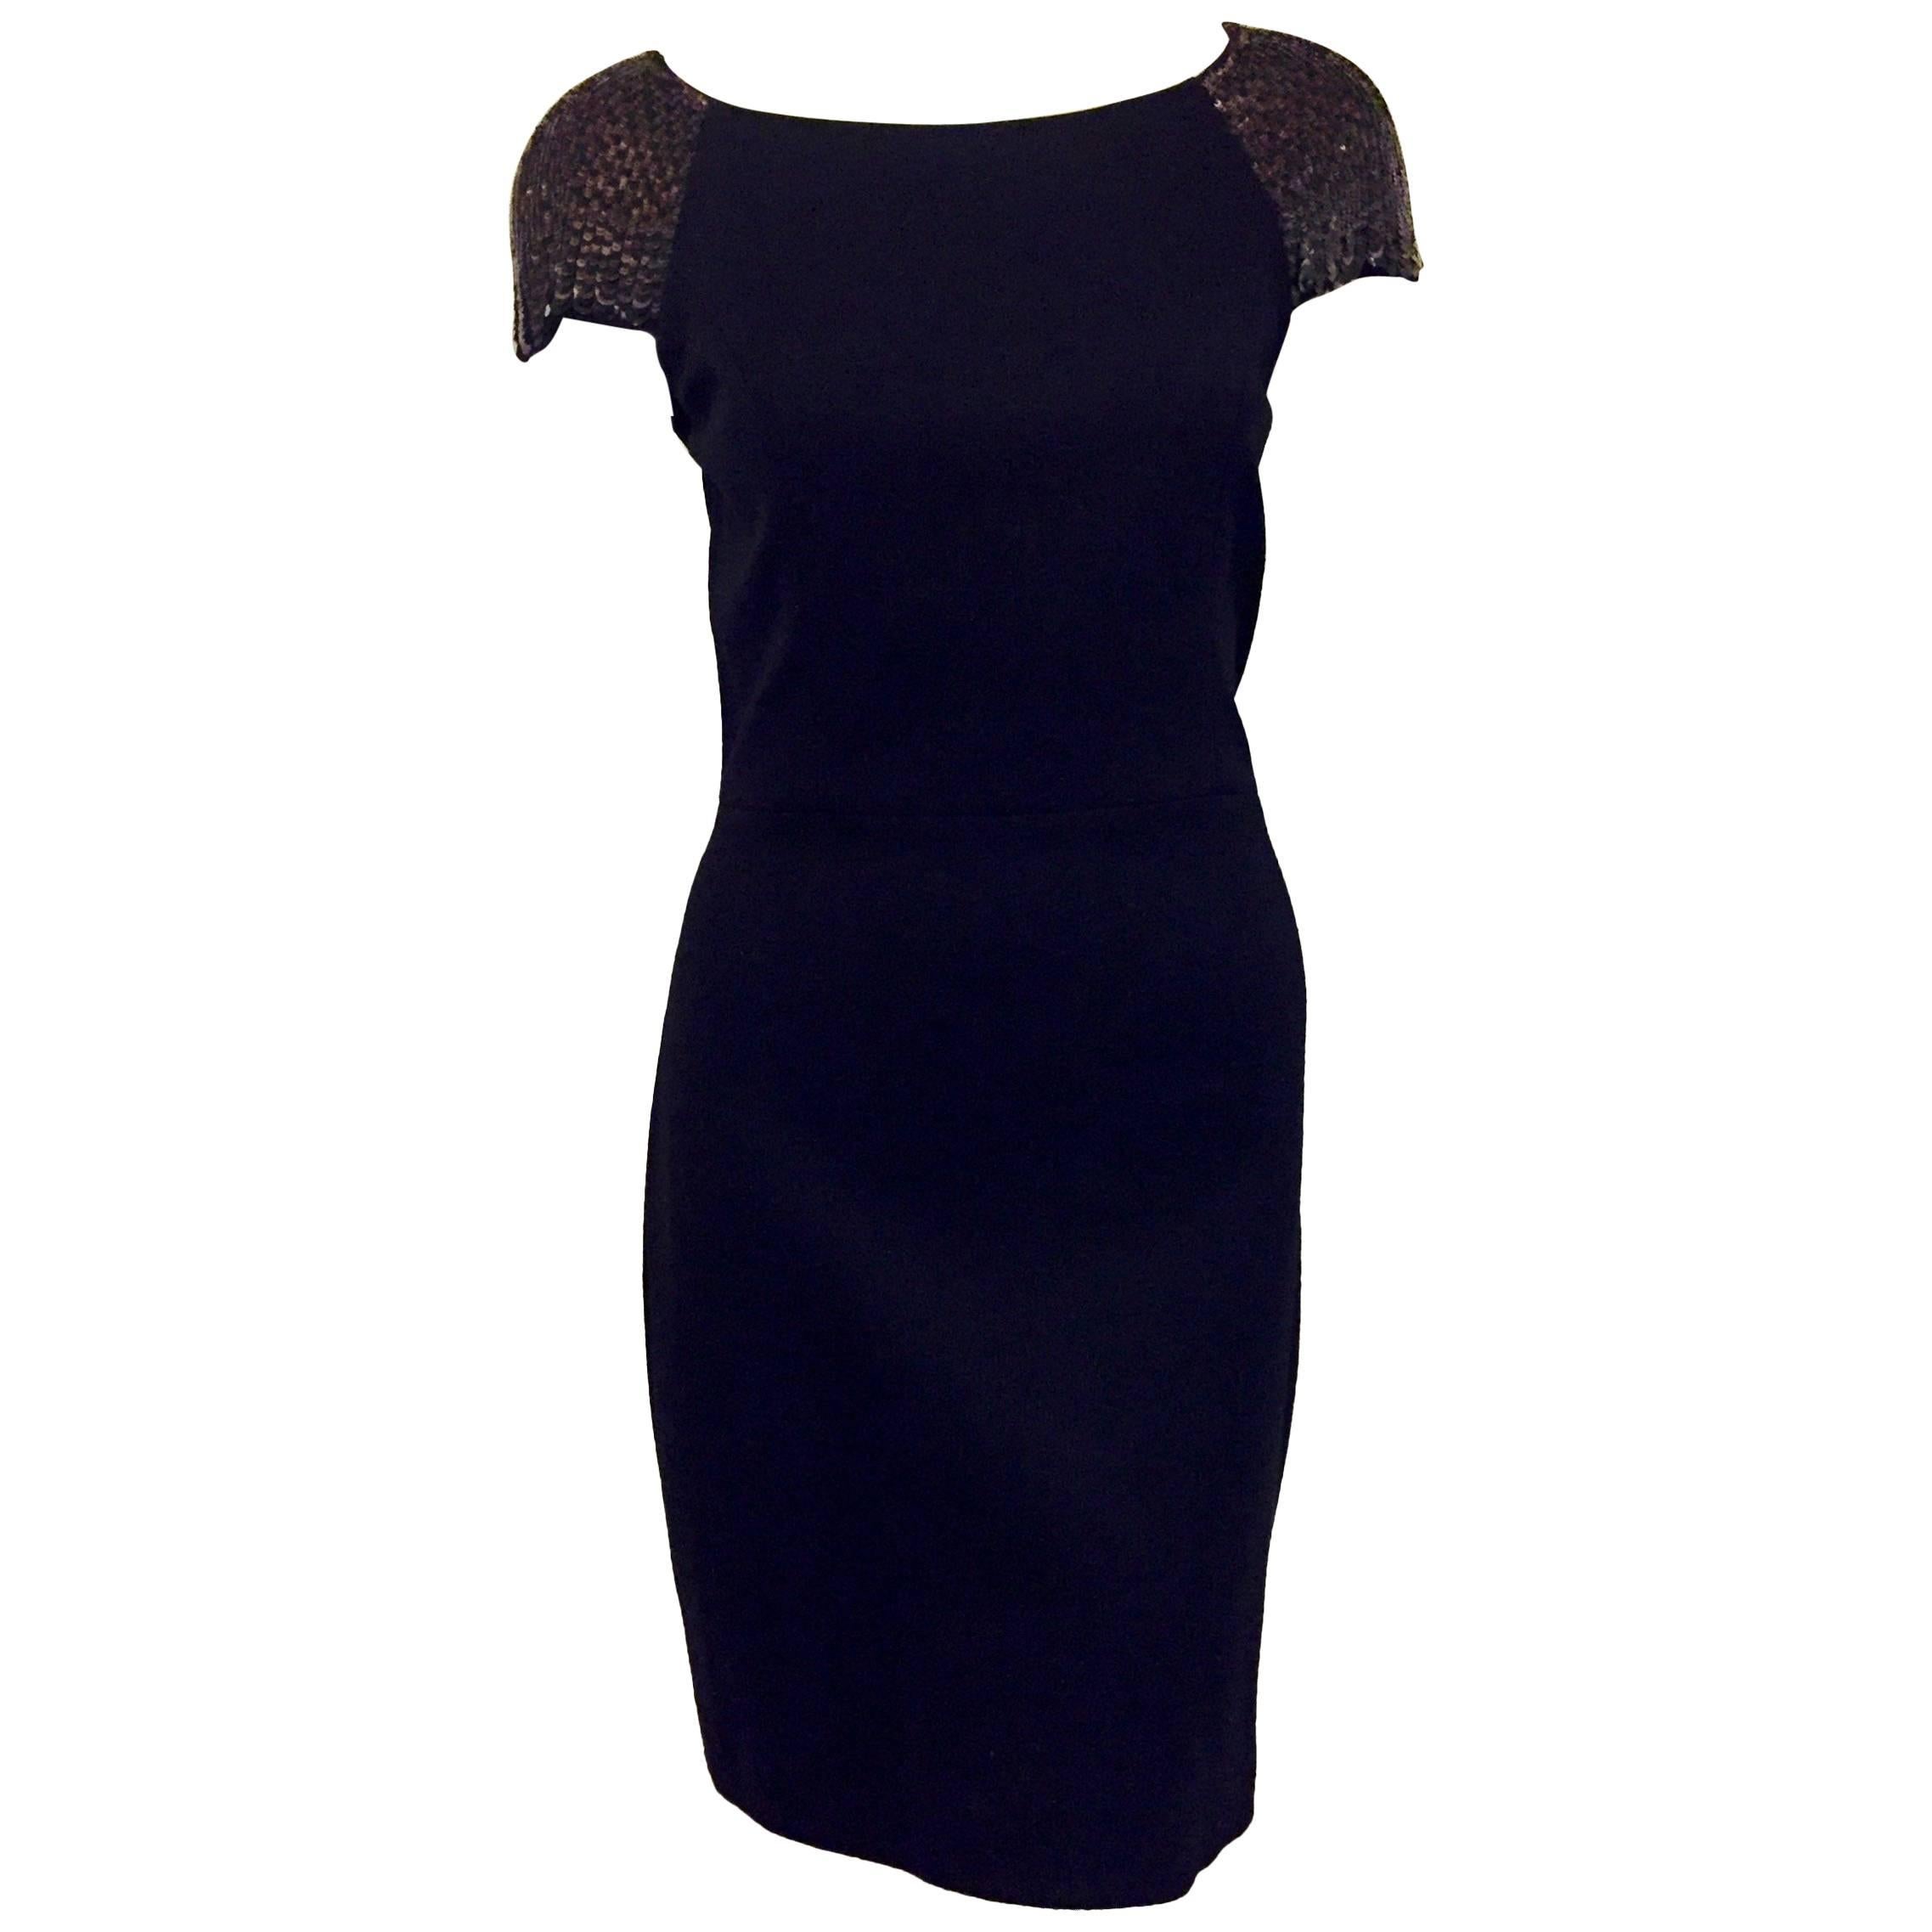 Wonderful Jason Wu Black Silk Dress with Sequined Cap Sleeves For Sale